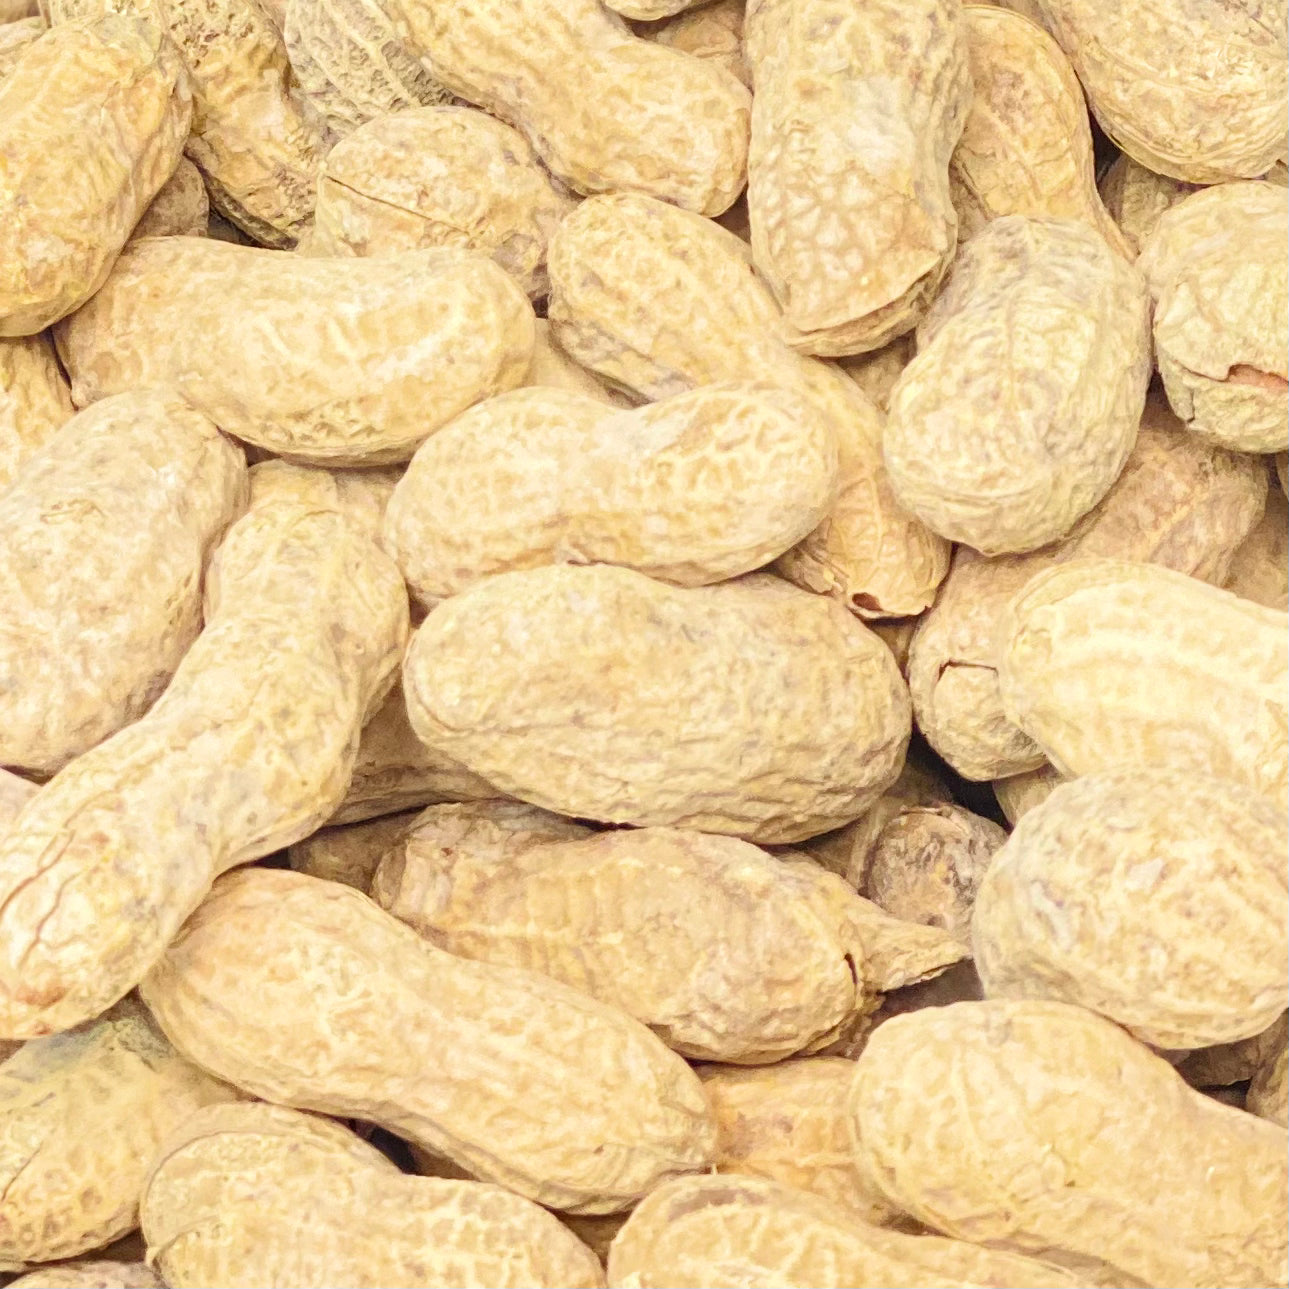 Peanuts In The Shell, Jumbo Salted (Roasted)